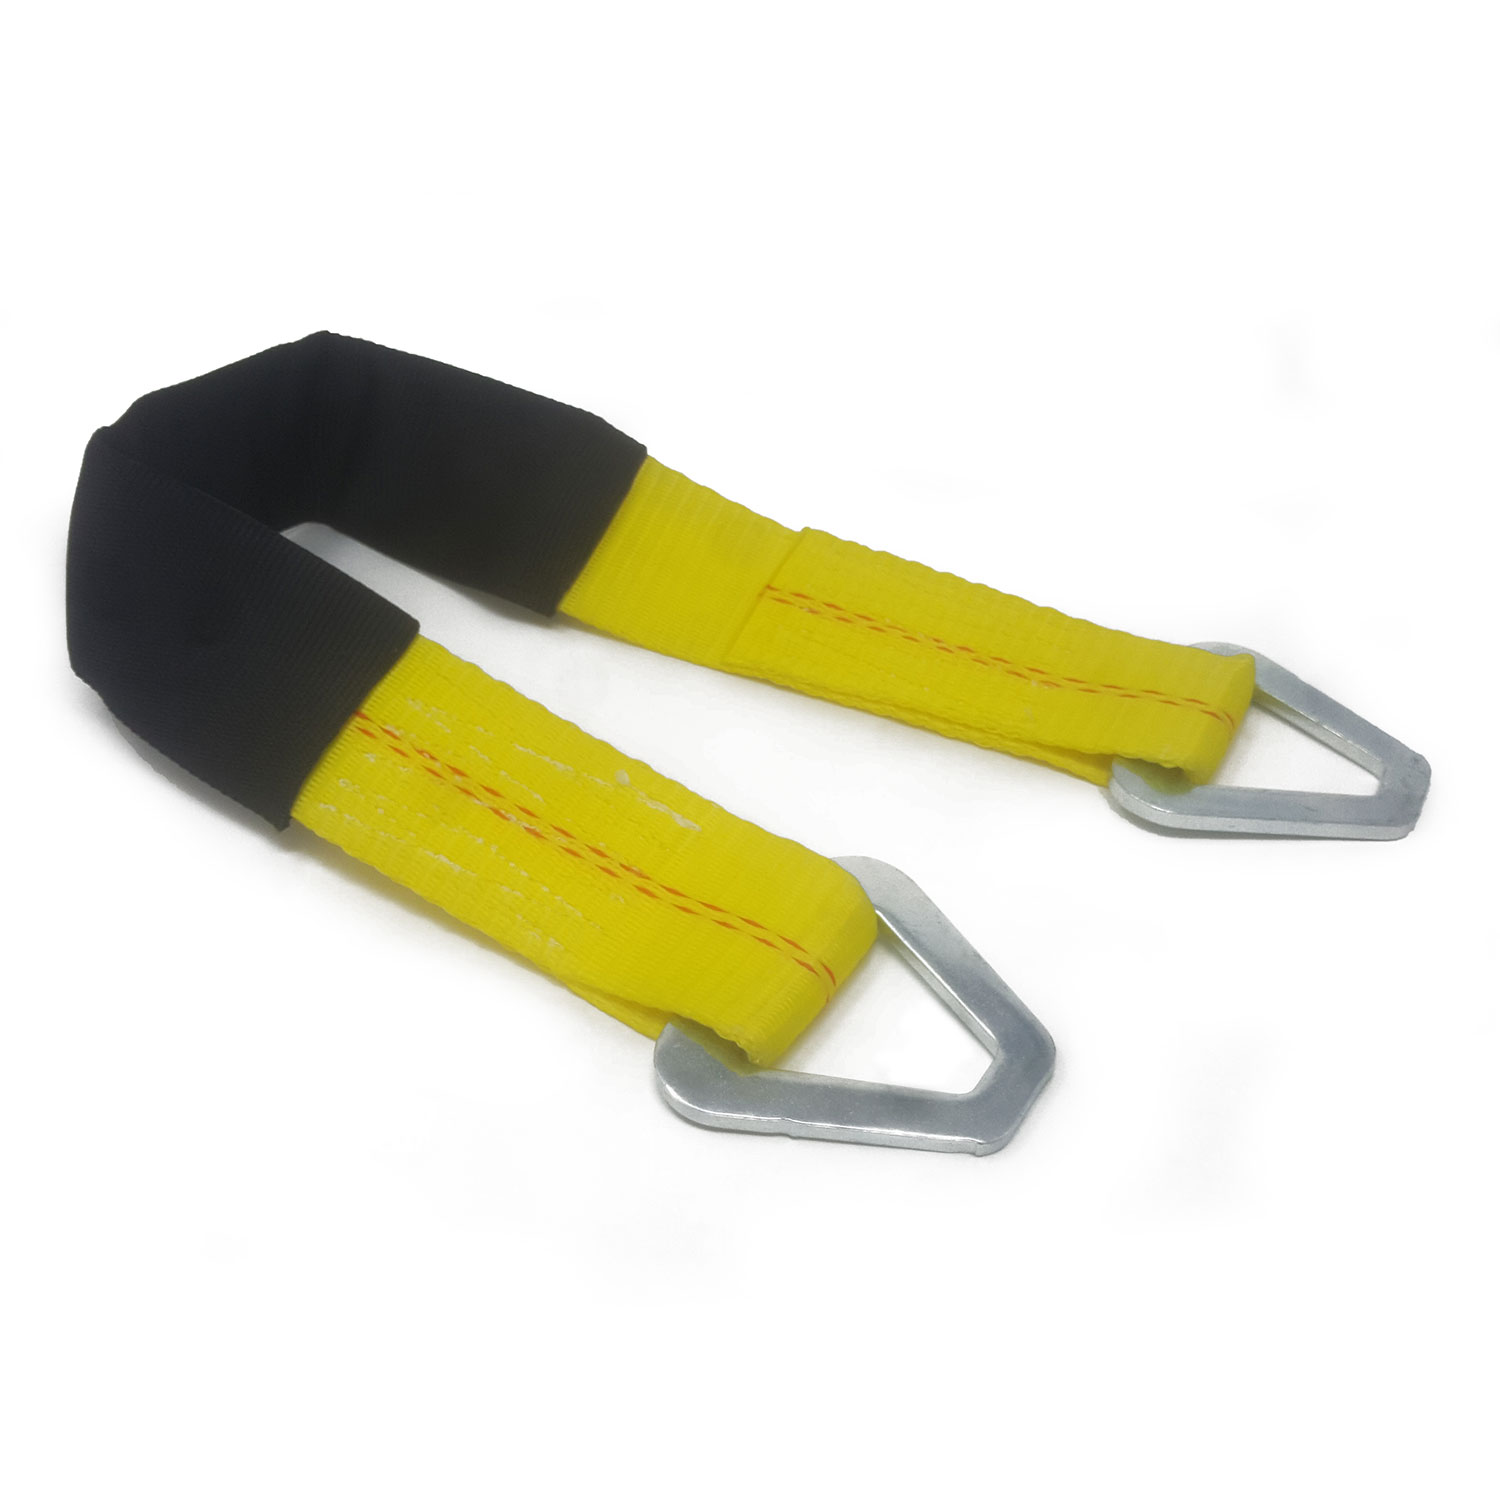 2' Come-A-Long Saver Sling and Extension Strap